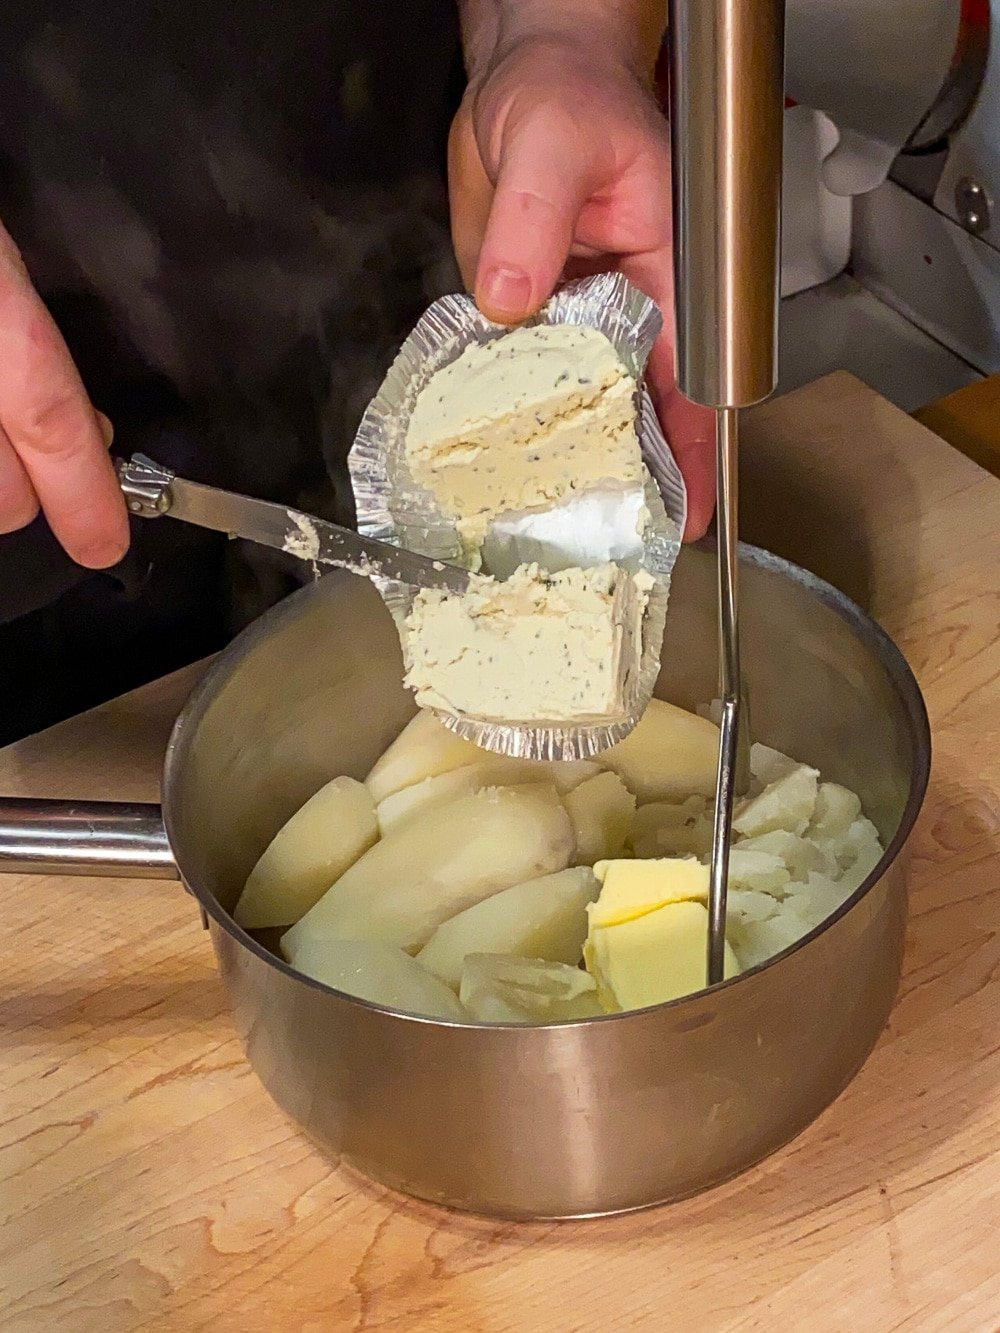 Adding the Boursin cheese to the mashed potatoes